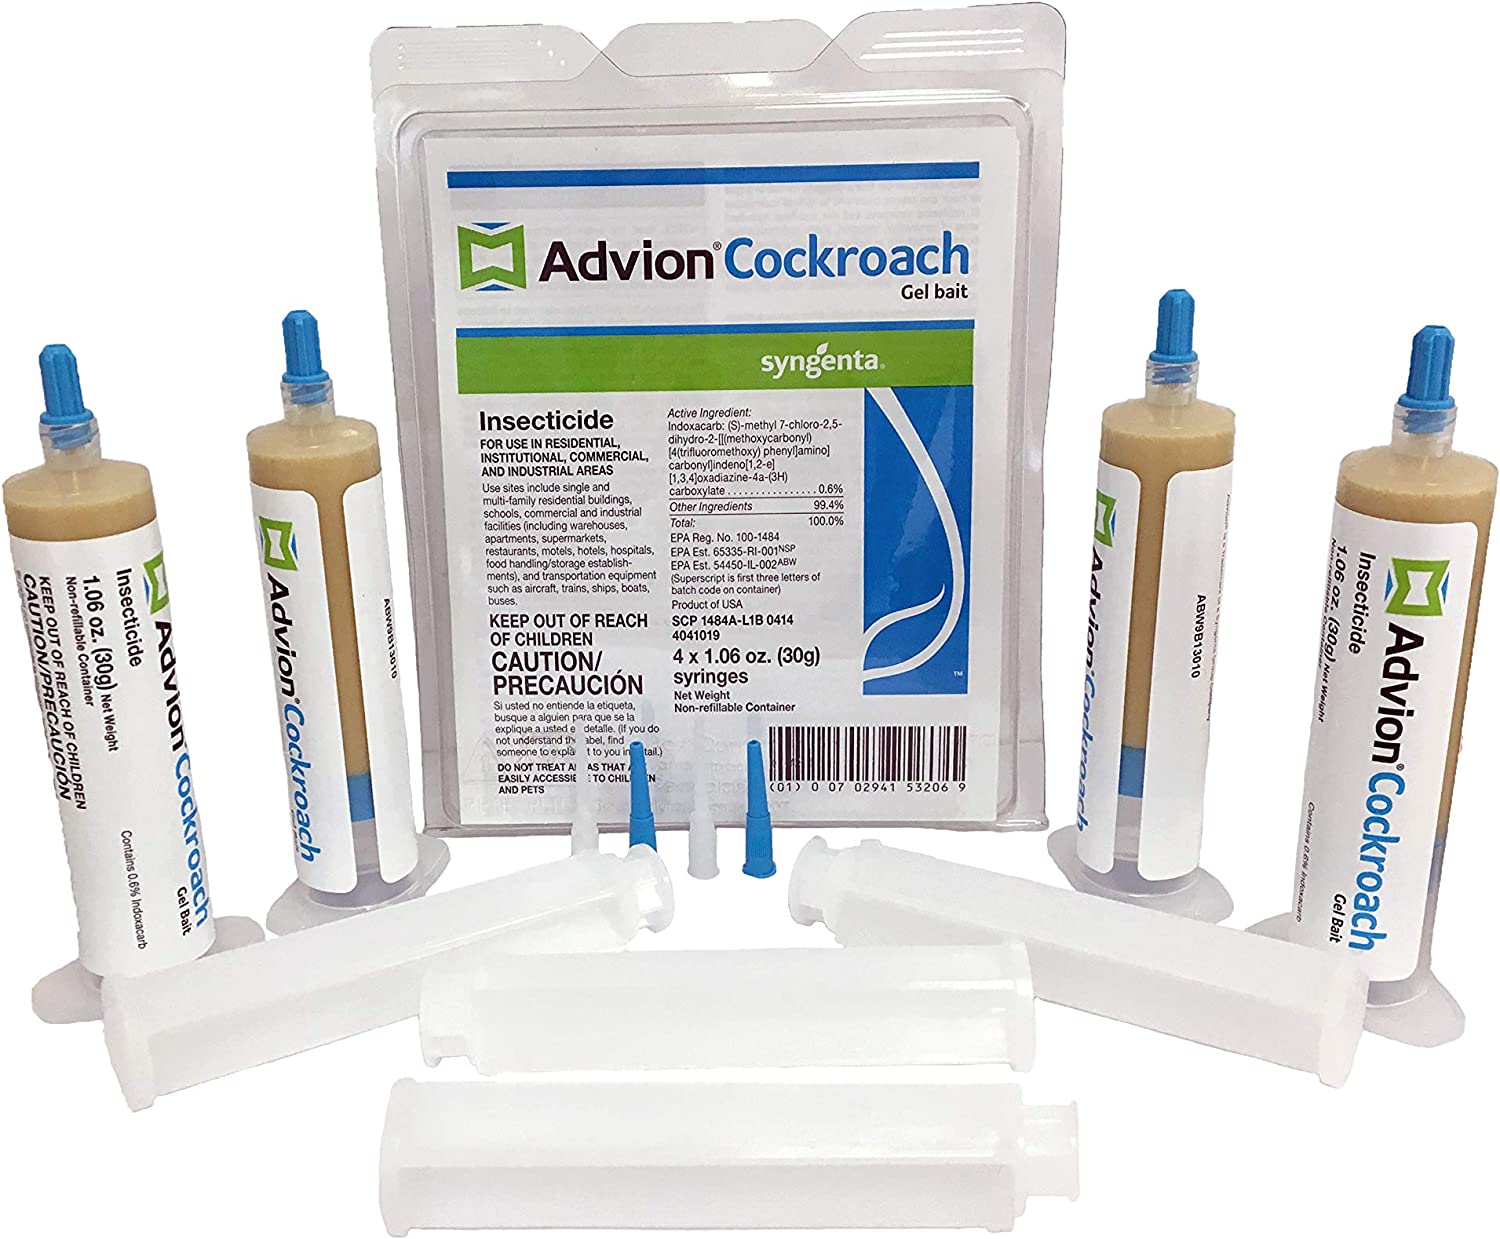 advion 383920 4 Tubes and 4 Plungers Cockroach German [...]